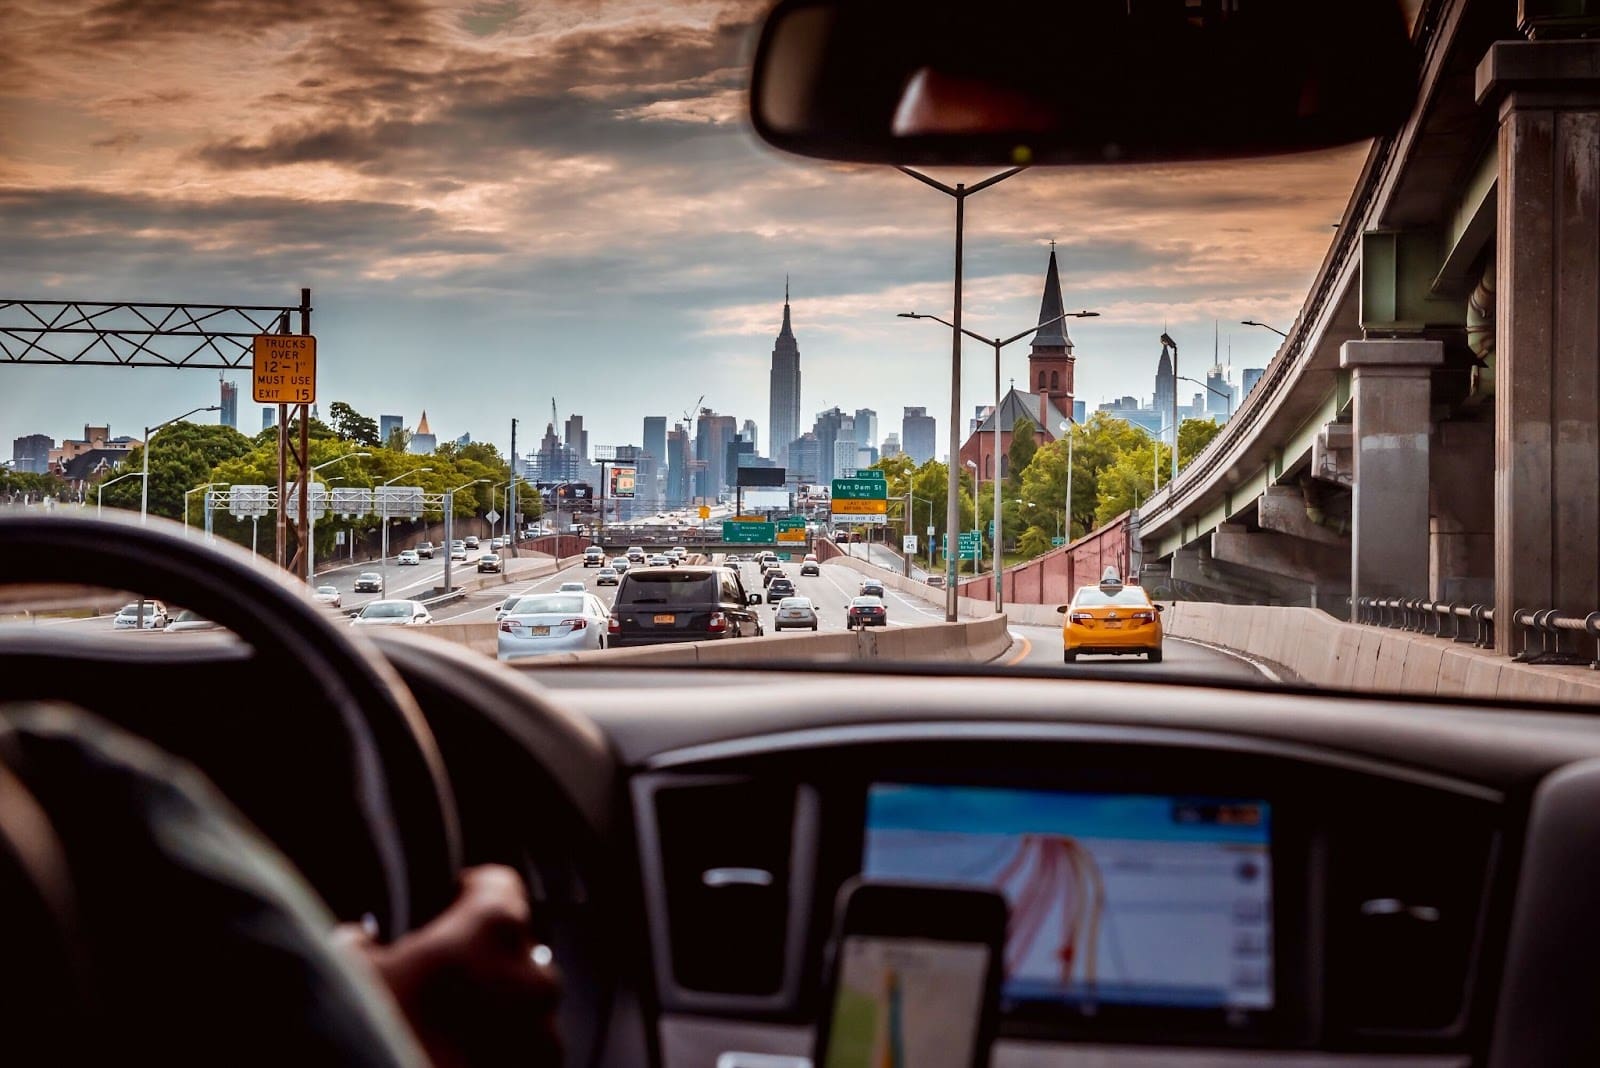 Uber car interior with New York skyscrapers, reflecting Uber's legal challenges in rideshare industry.